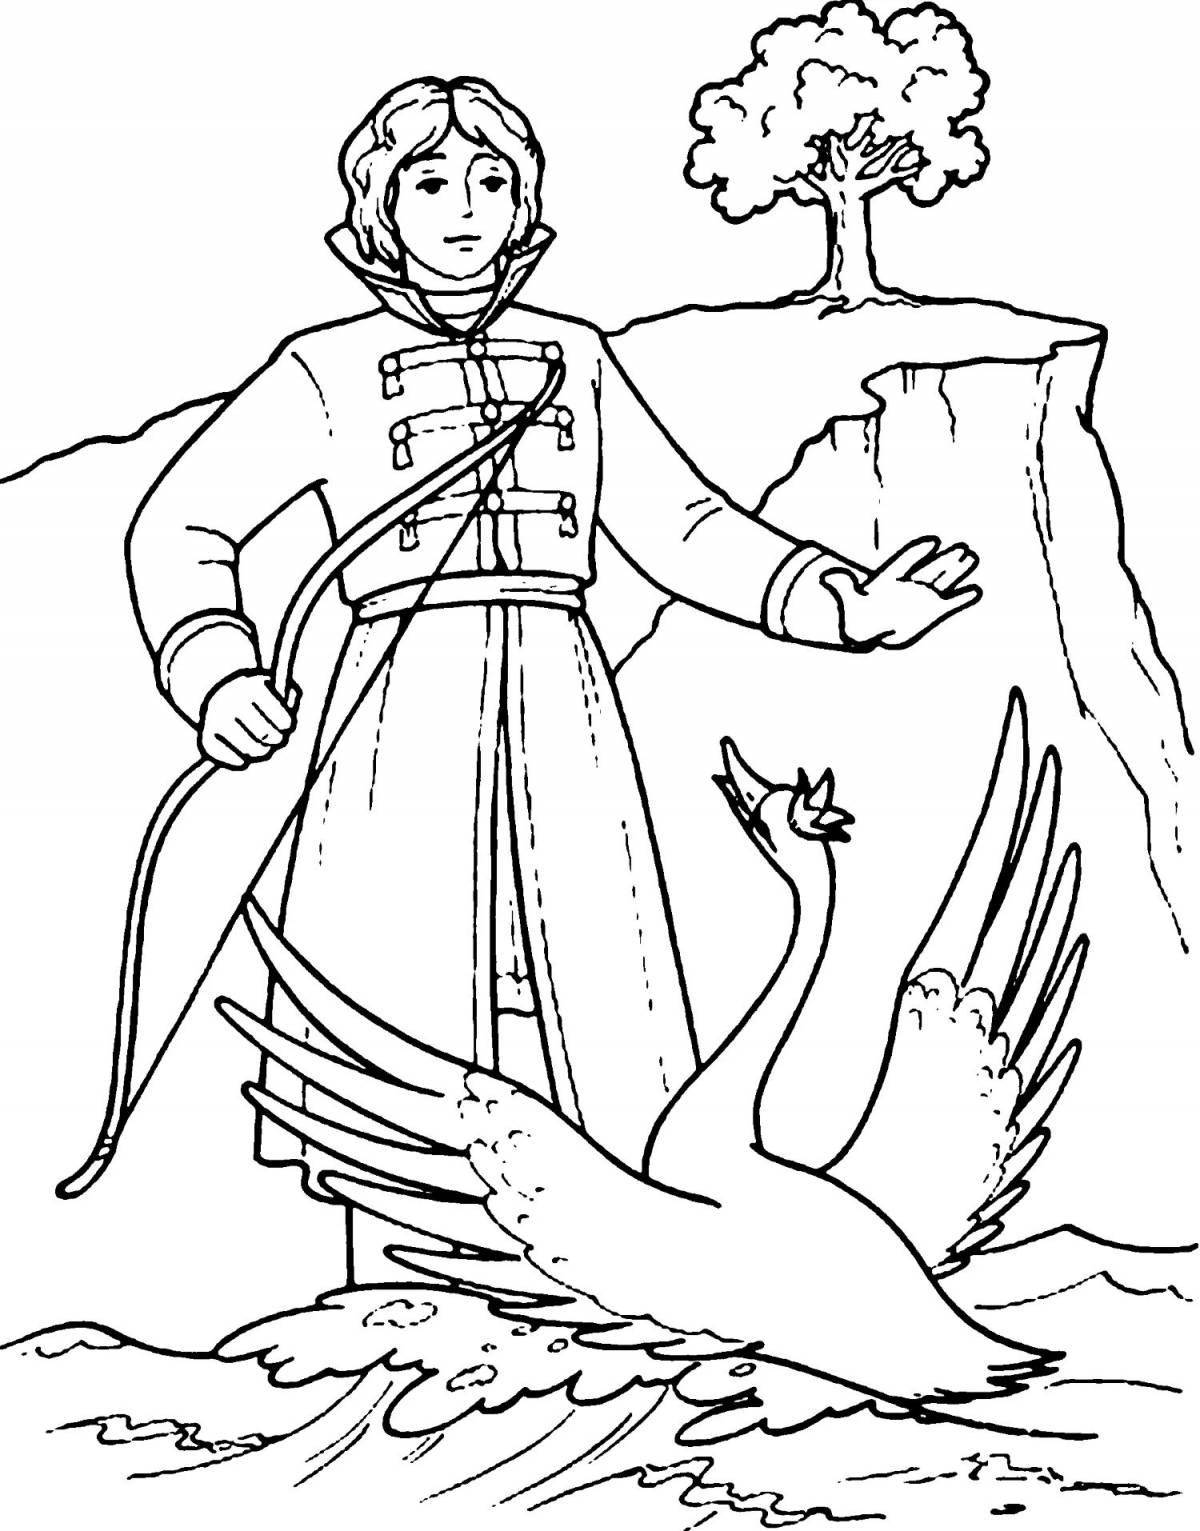 Delightful coloring book for the tale of Tsar Saltan